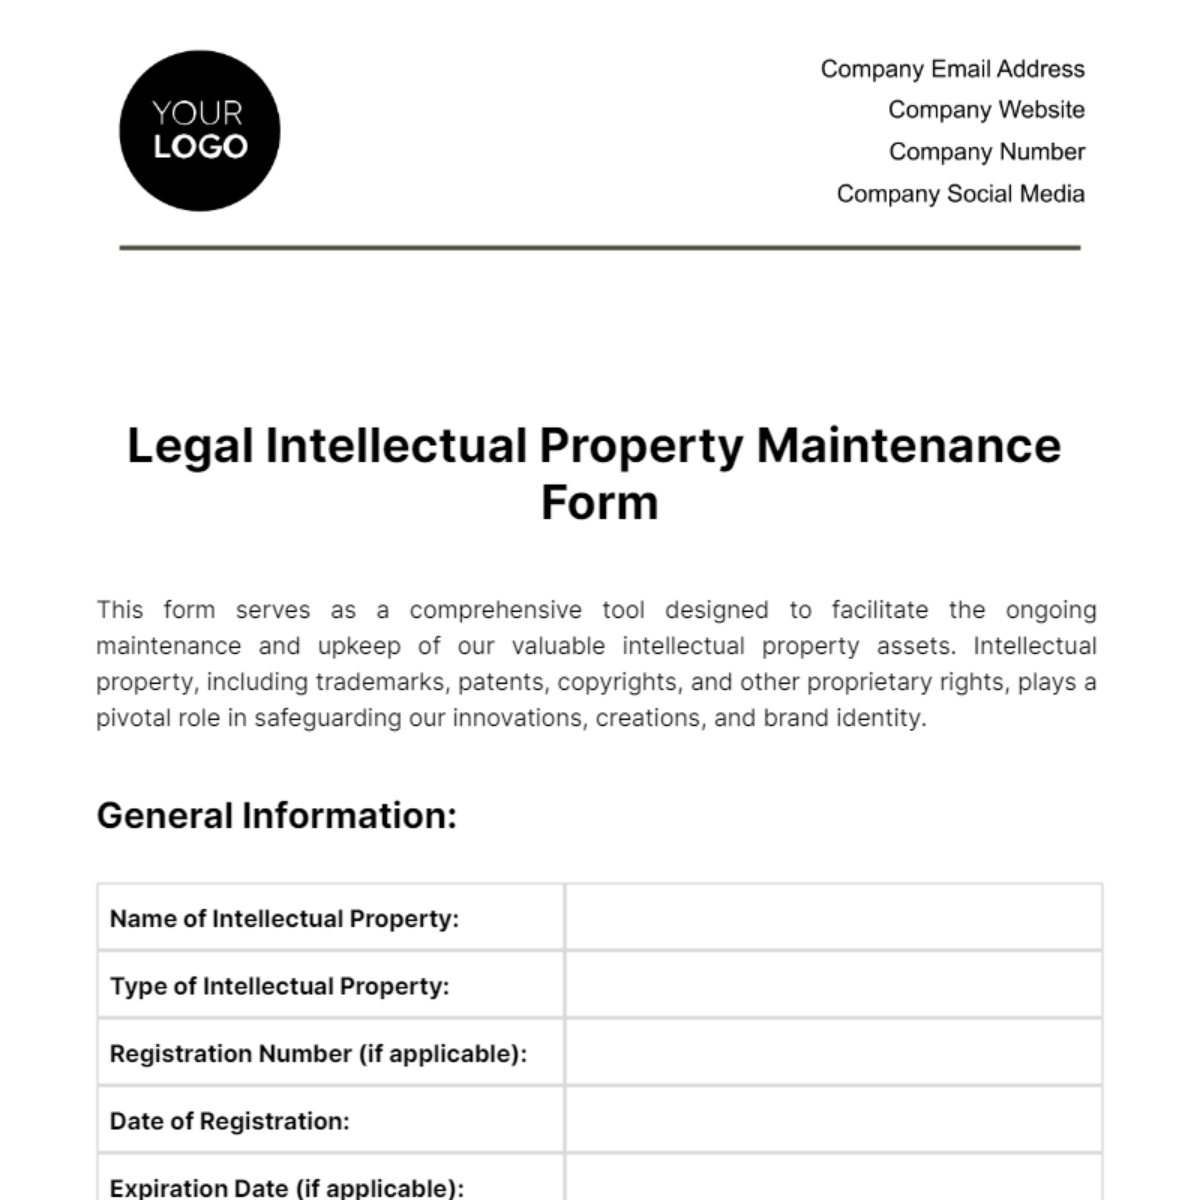 Free Legal Intellectual Property Maintenance Form Template